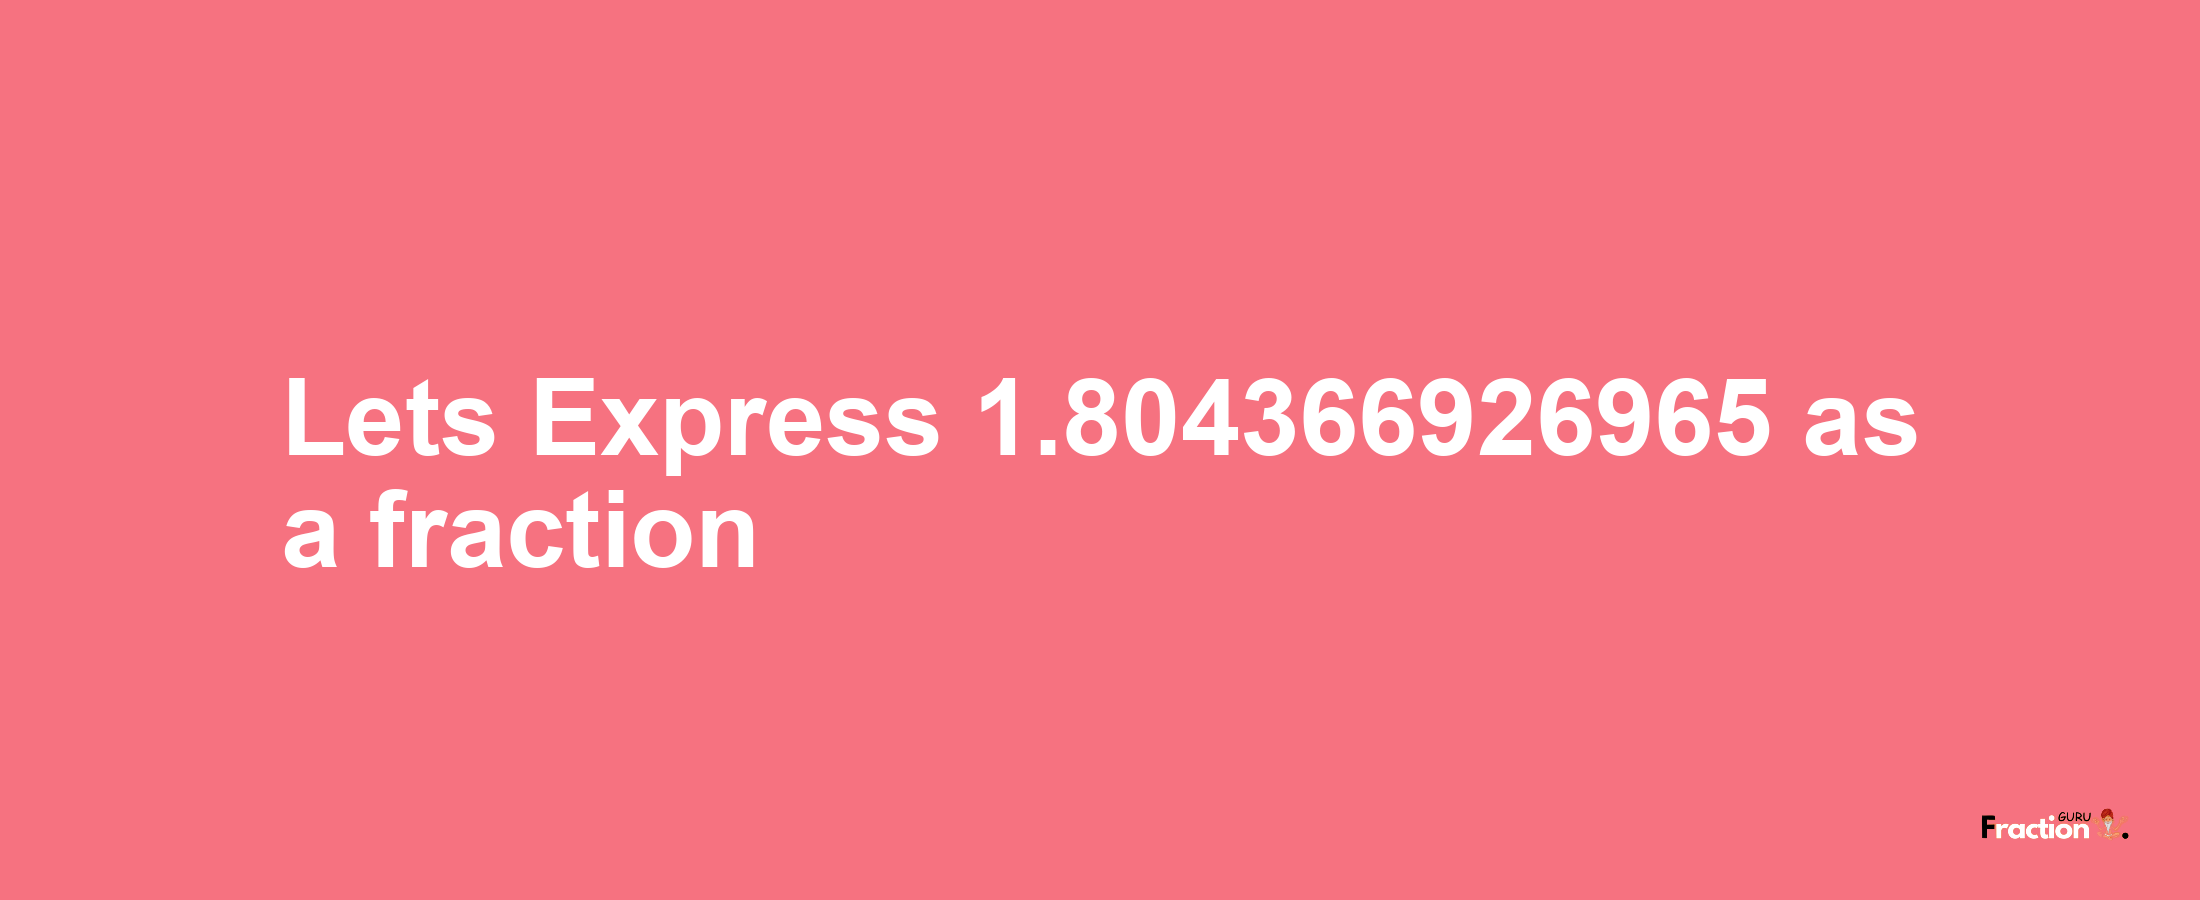 Lets Express 1.804366926965 as afraction